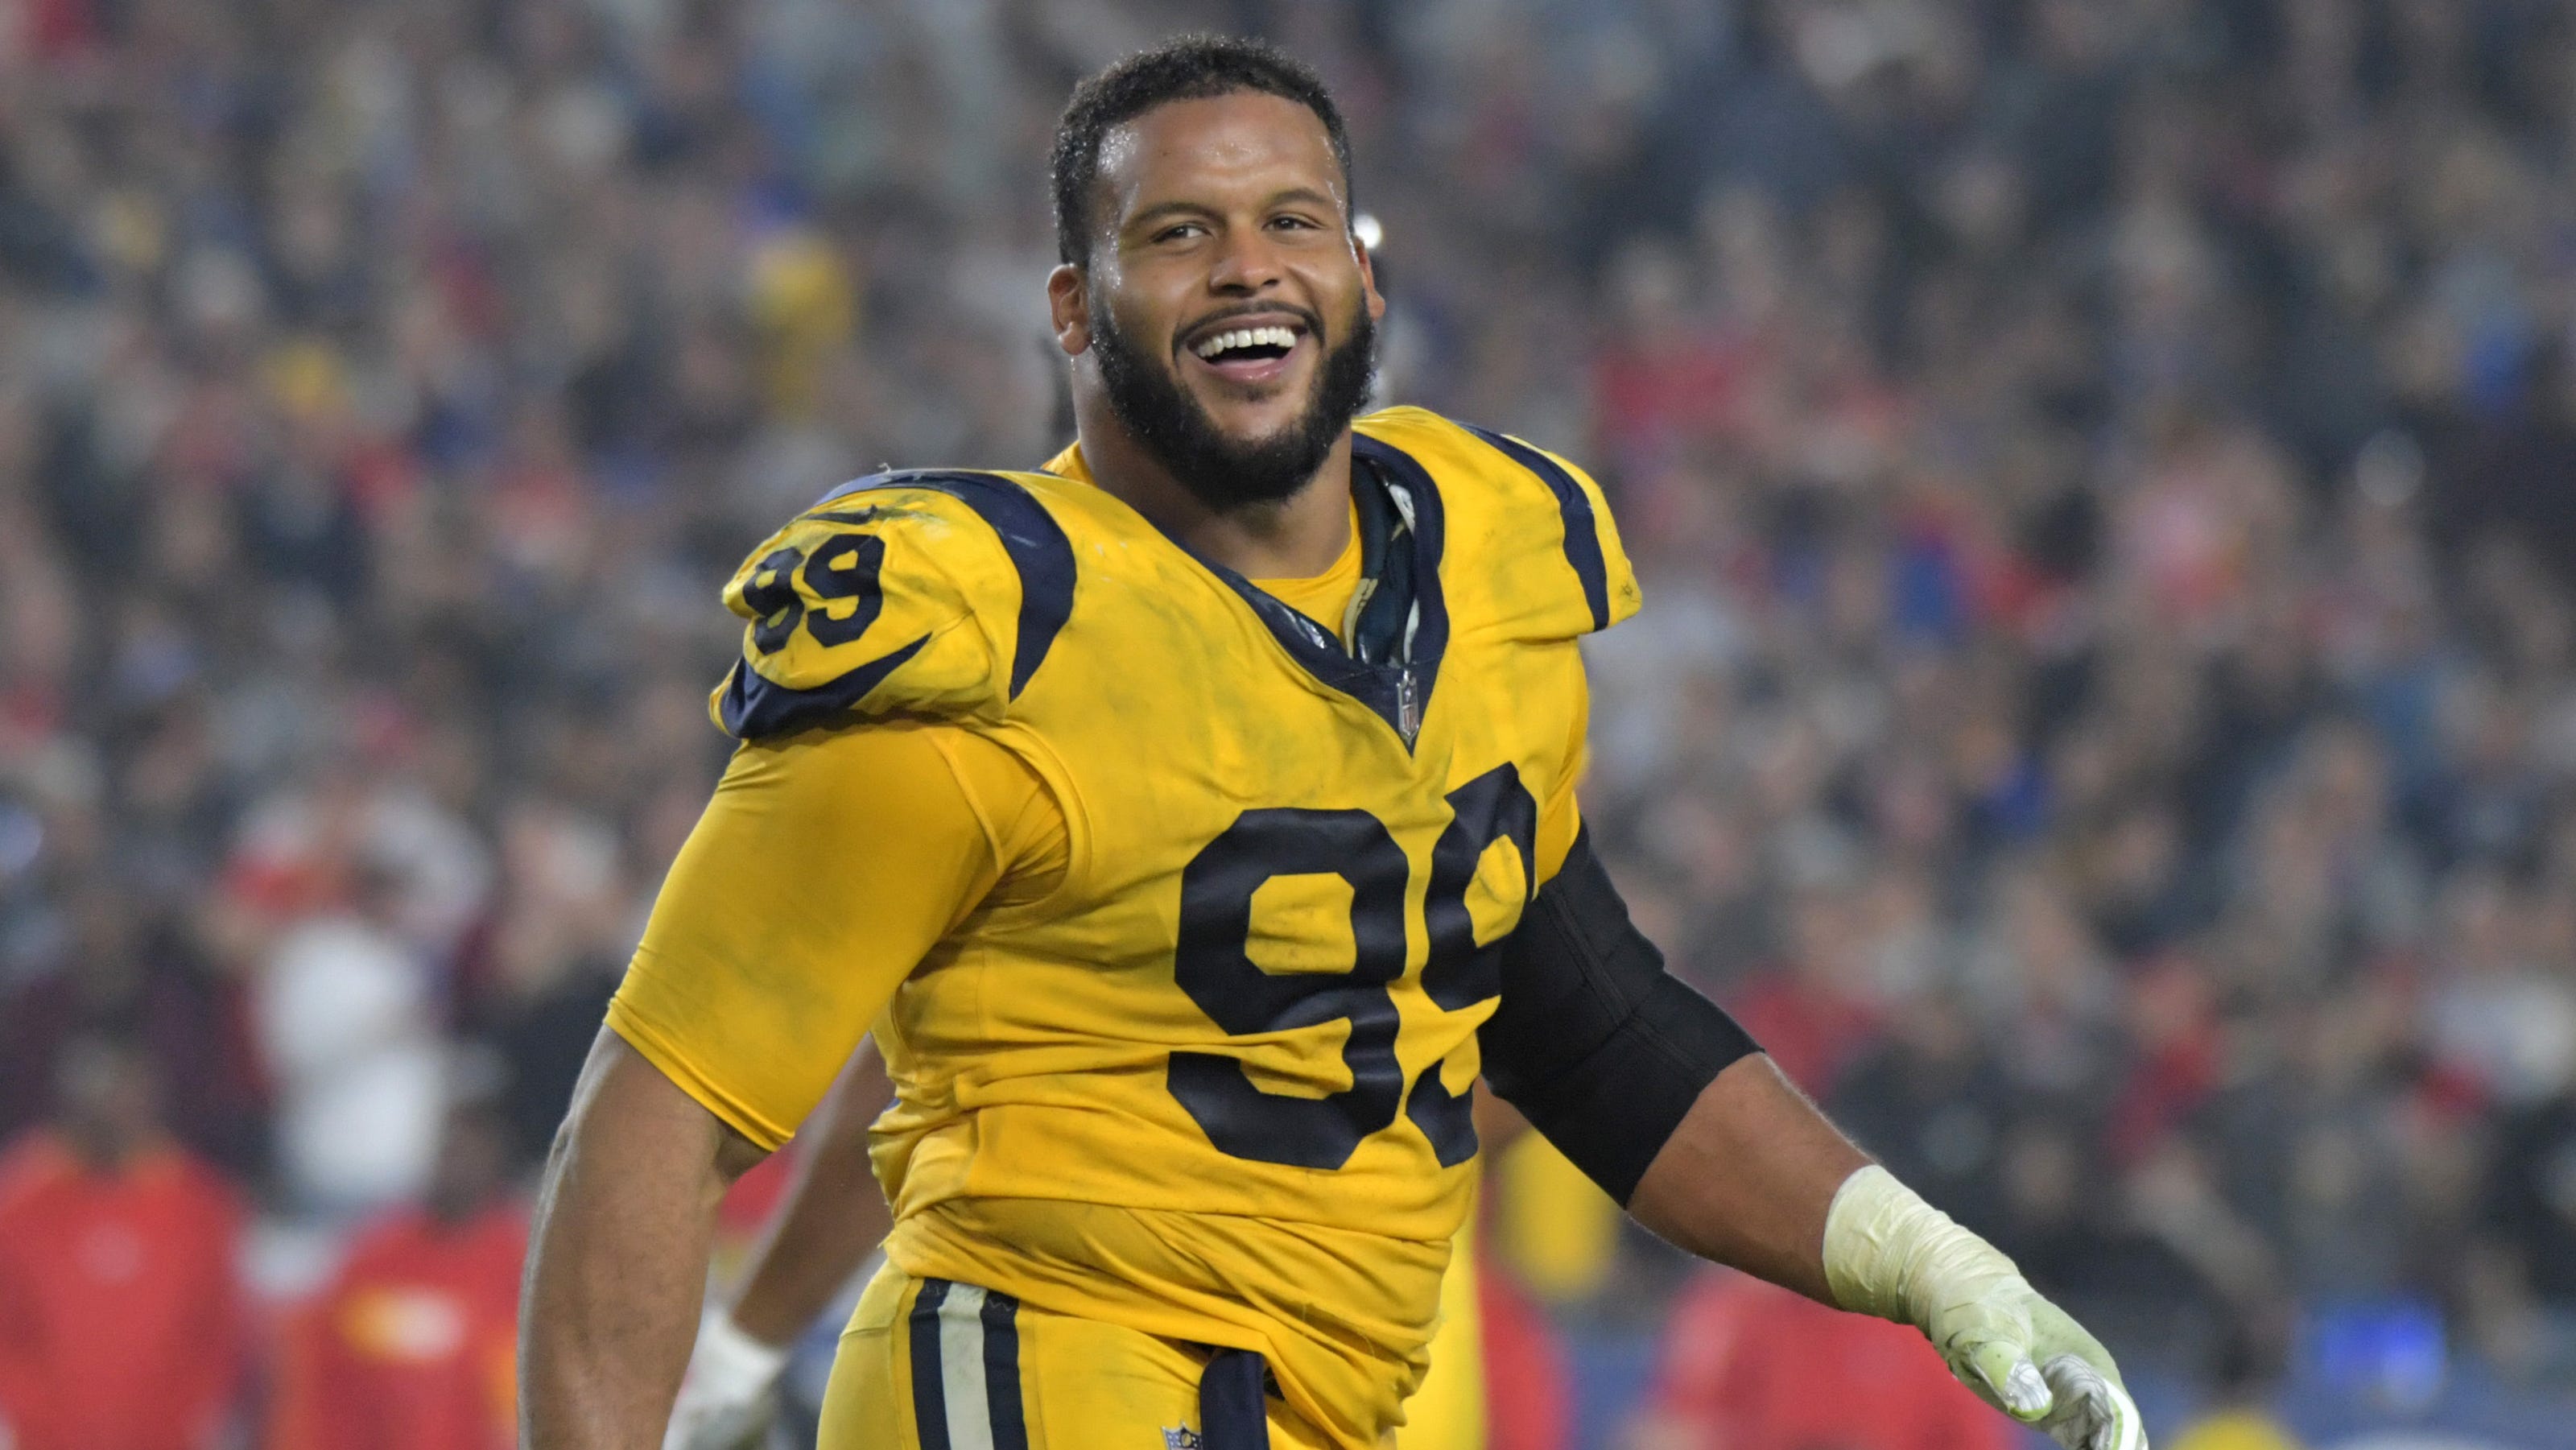 NFL awards Rams' Aaron Donald repeats as defensive player of year